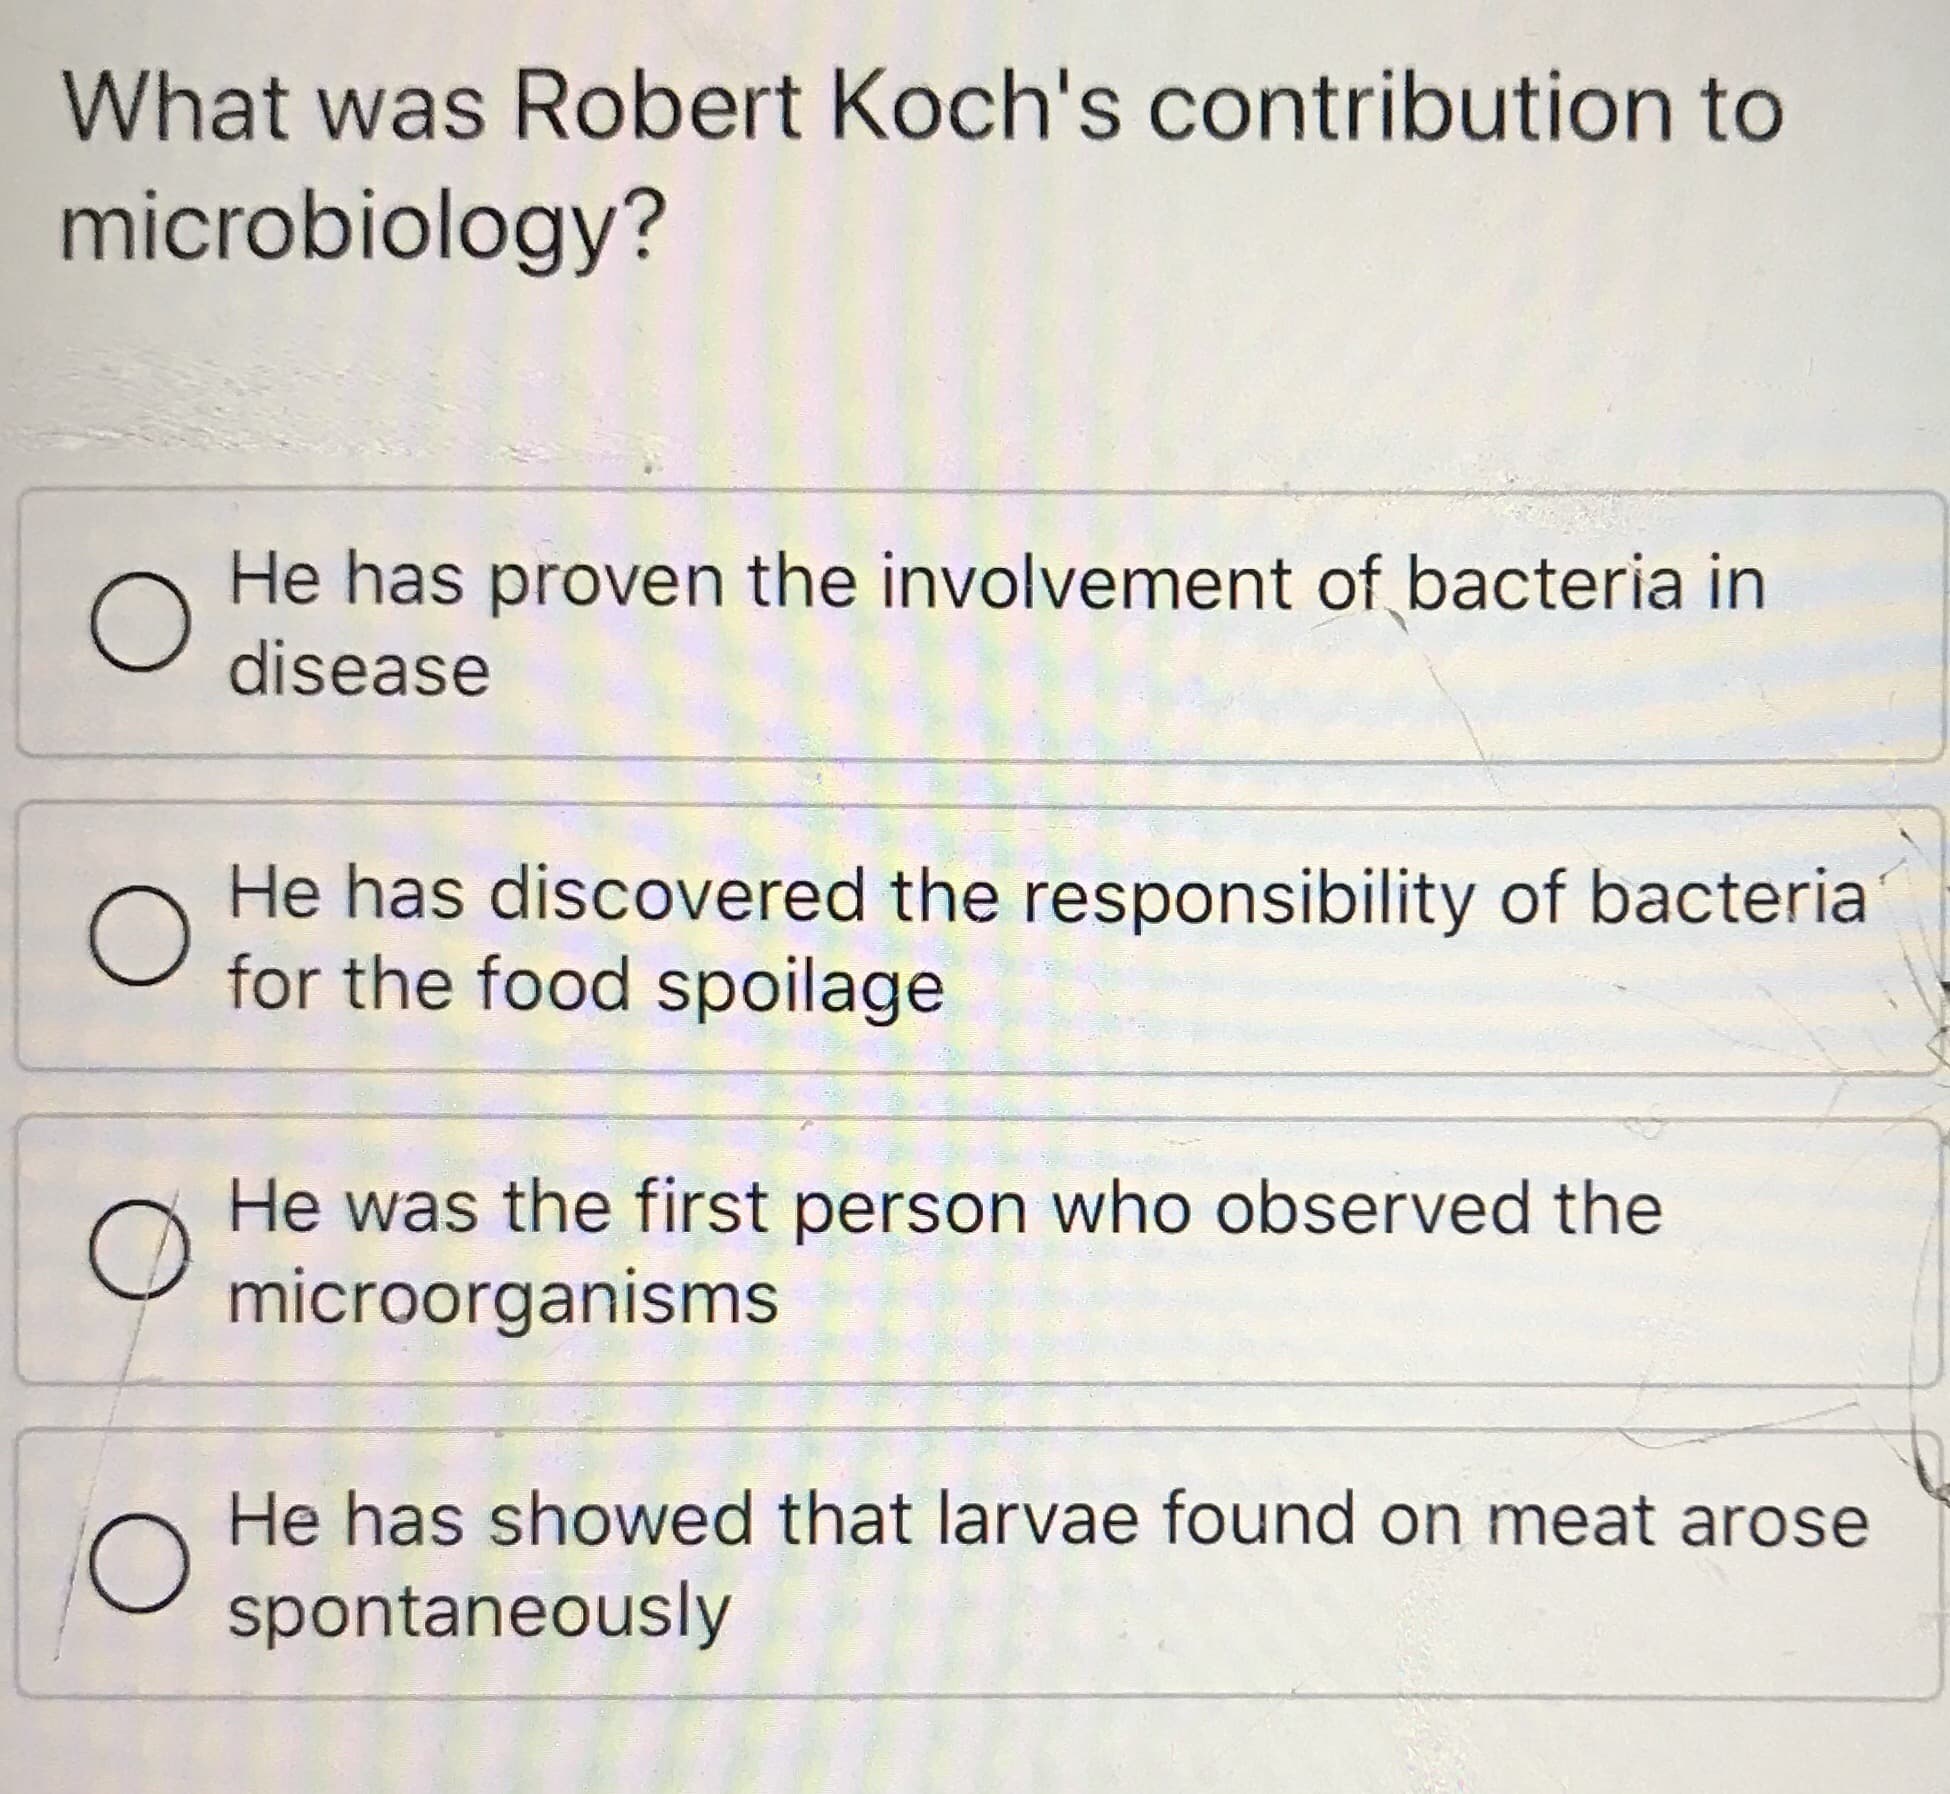 What was Robert Koch's contribution to
microbiology?
He has proven the involvement of bacteria in
disease
He has discovered the responsibility of bacteria
for the food spoilage
He was the first person who observed the
microorganisms
He has showed that larvae found on meat arose
spontaneously
